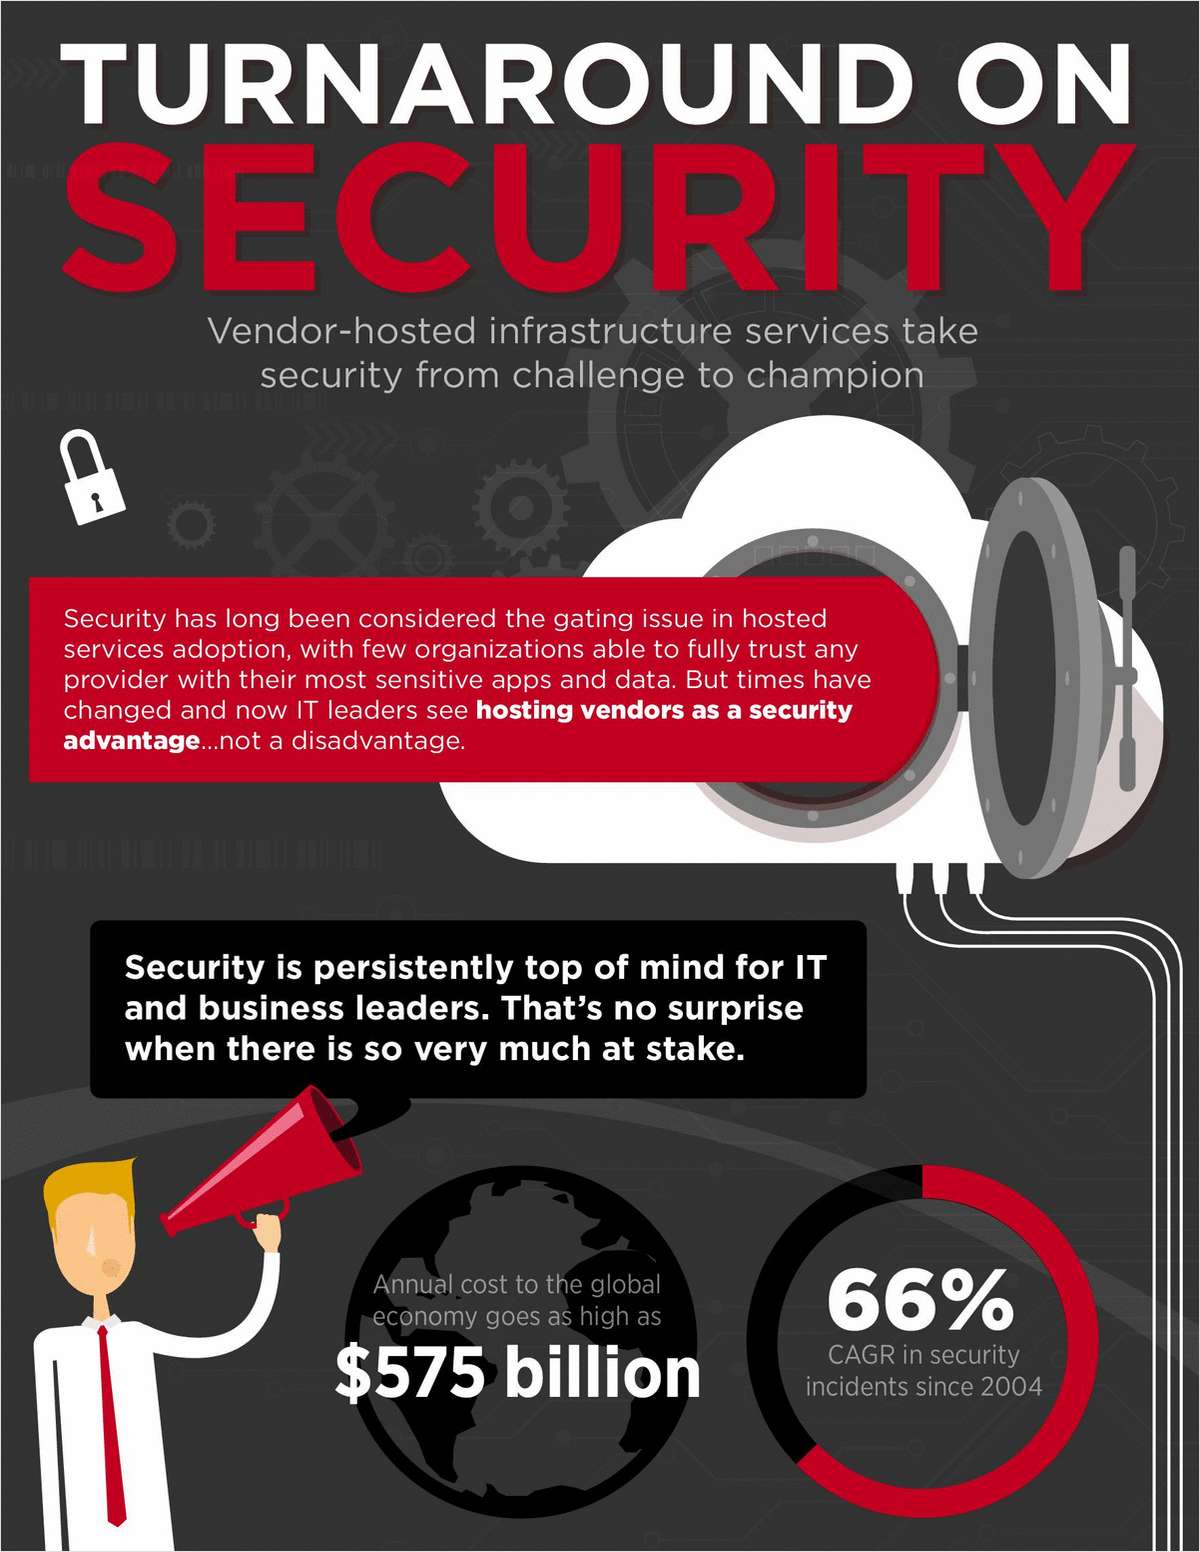 Is Security too Risky to Outsource?